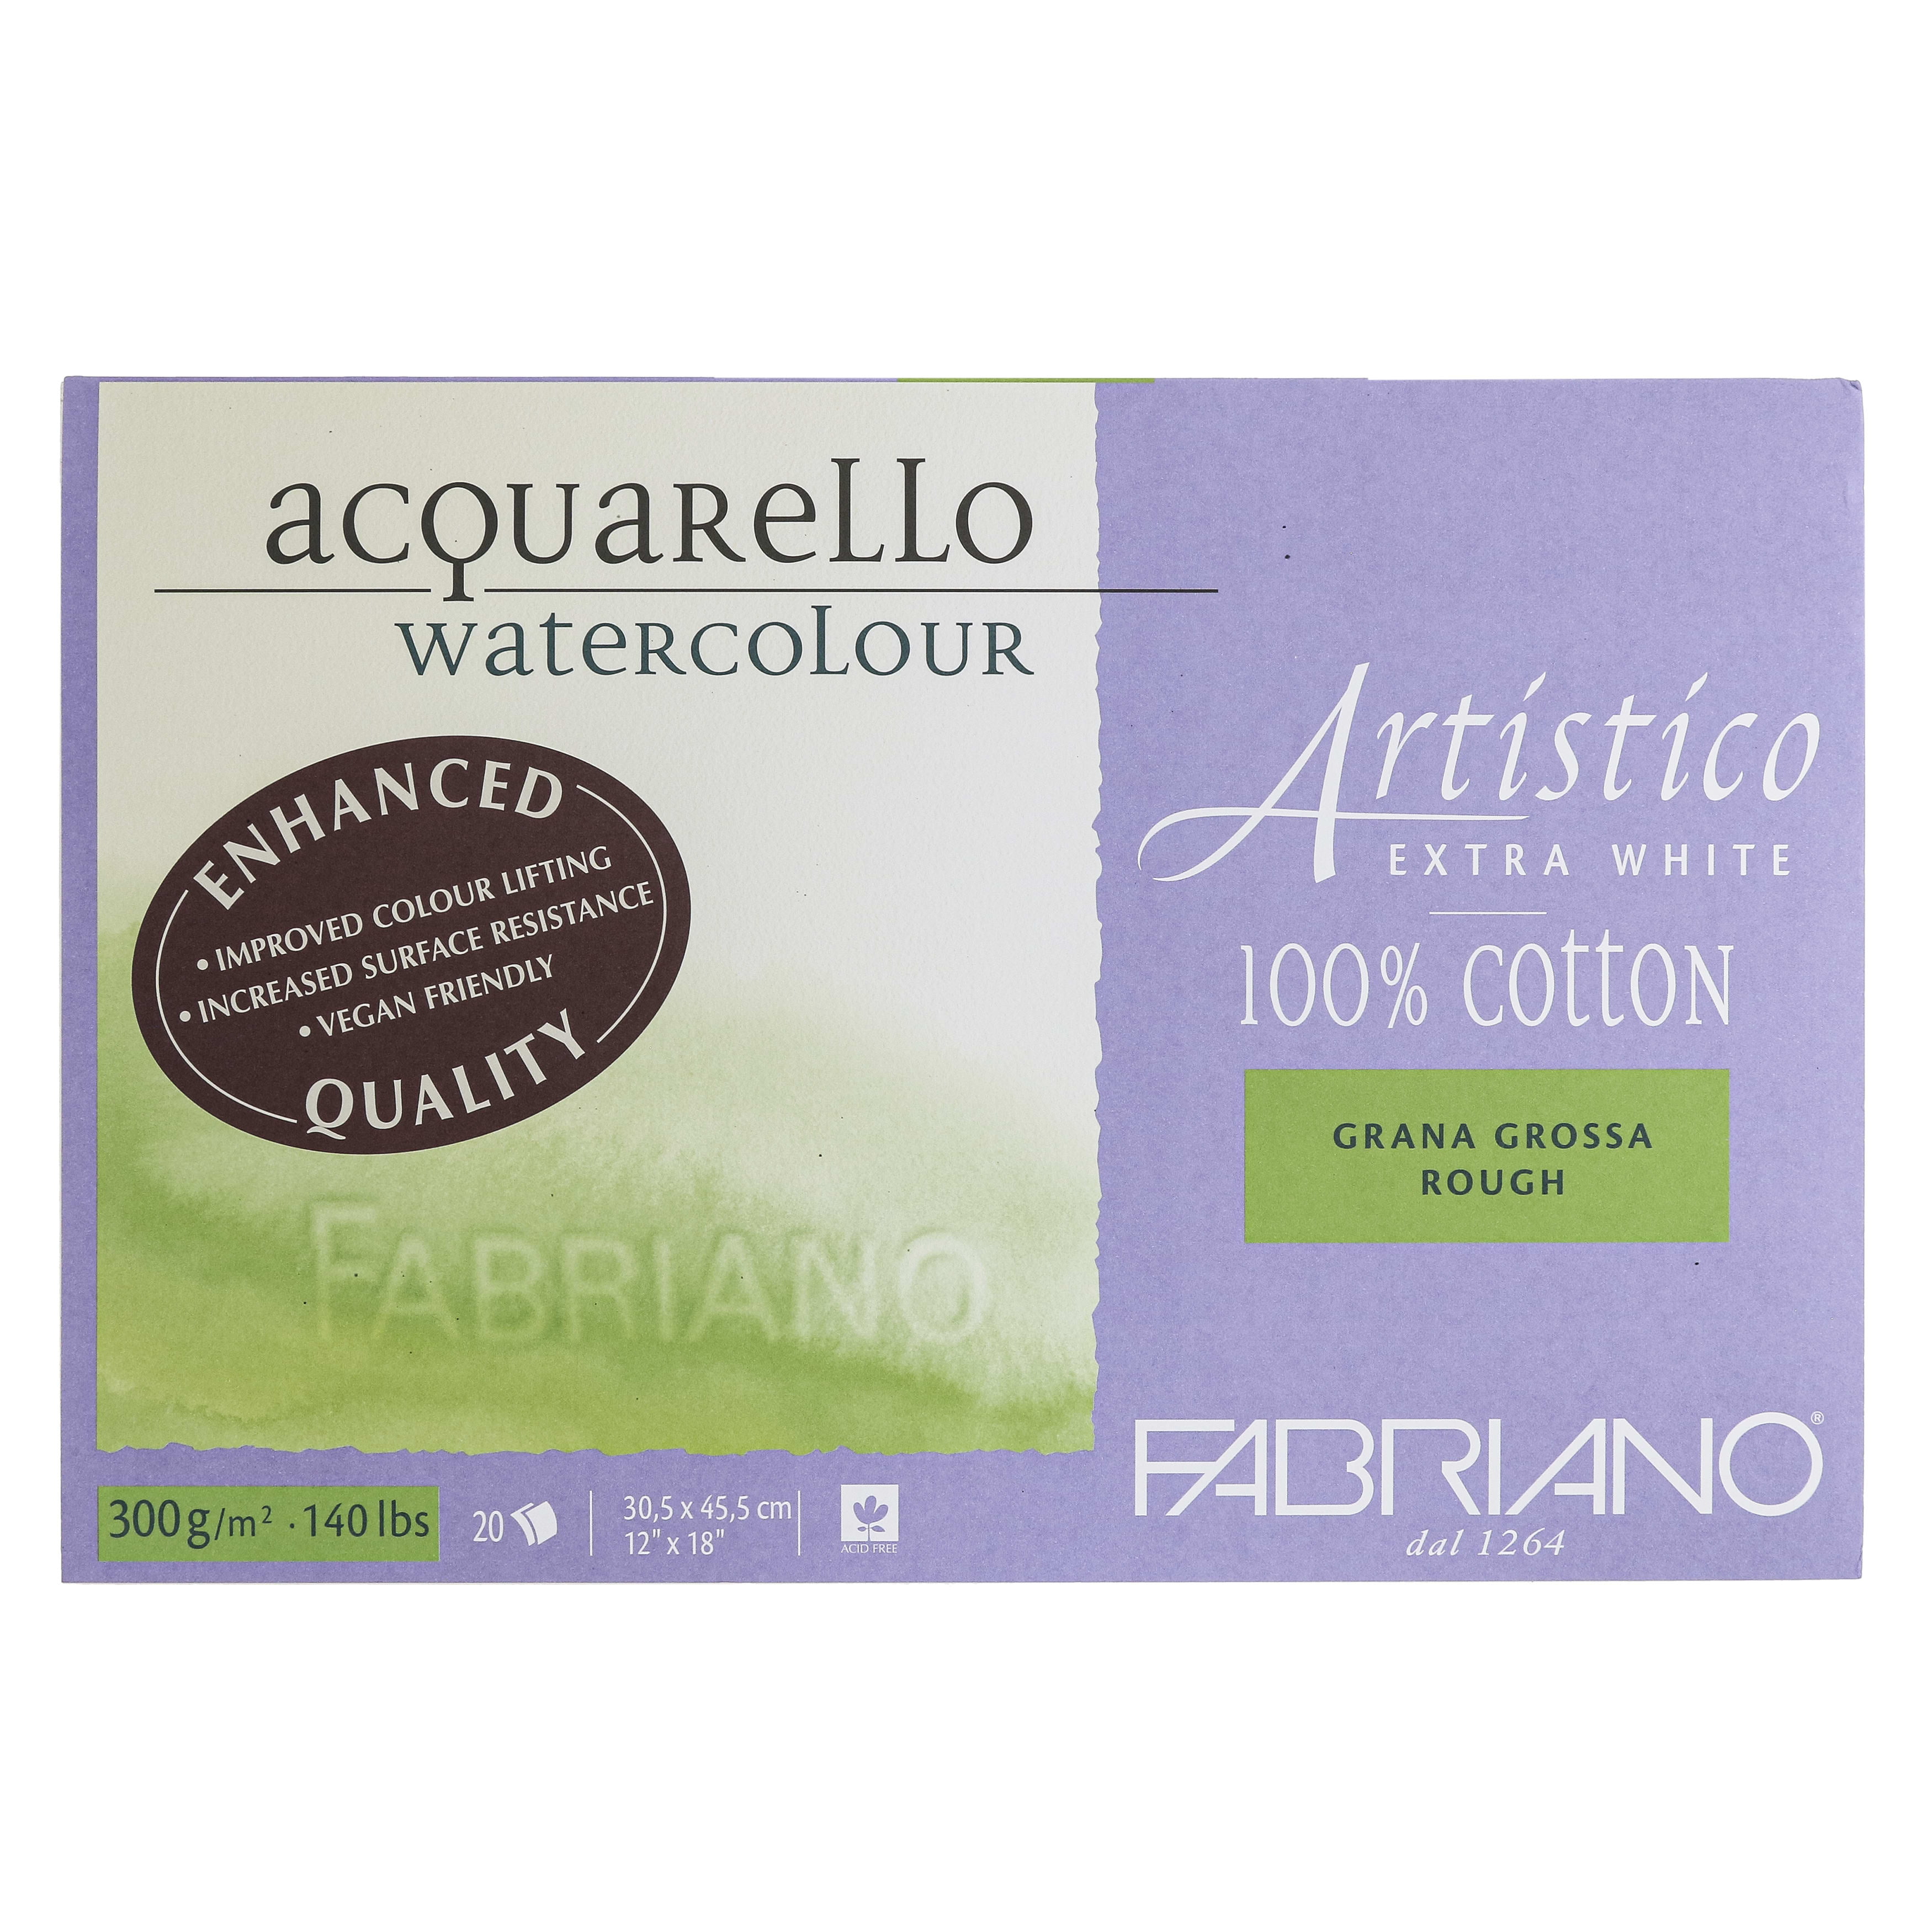 1 x Fabriano Artistico Watercolour Paper 300gsm (140lbs) NOT Full